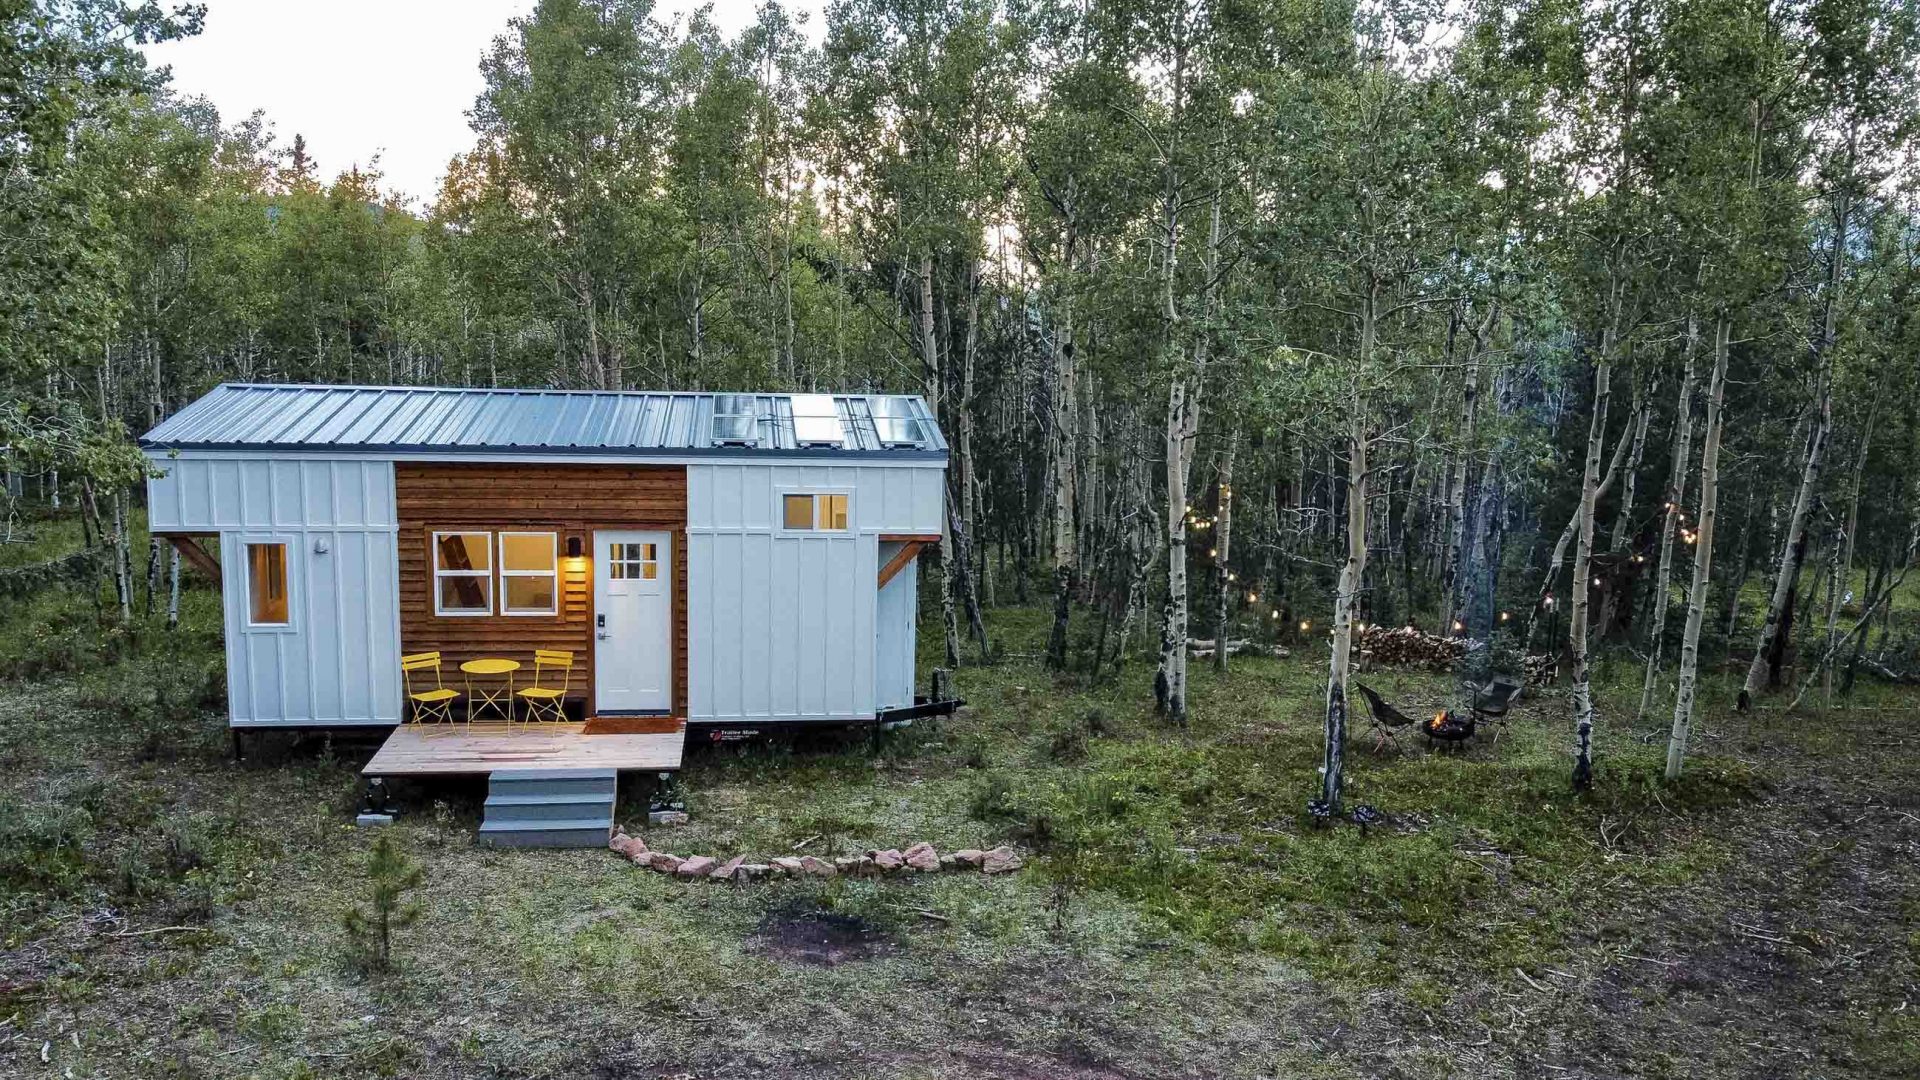 a tiny house lit up by soft lights stands in amongst trees.